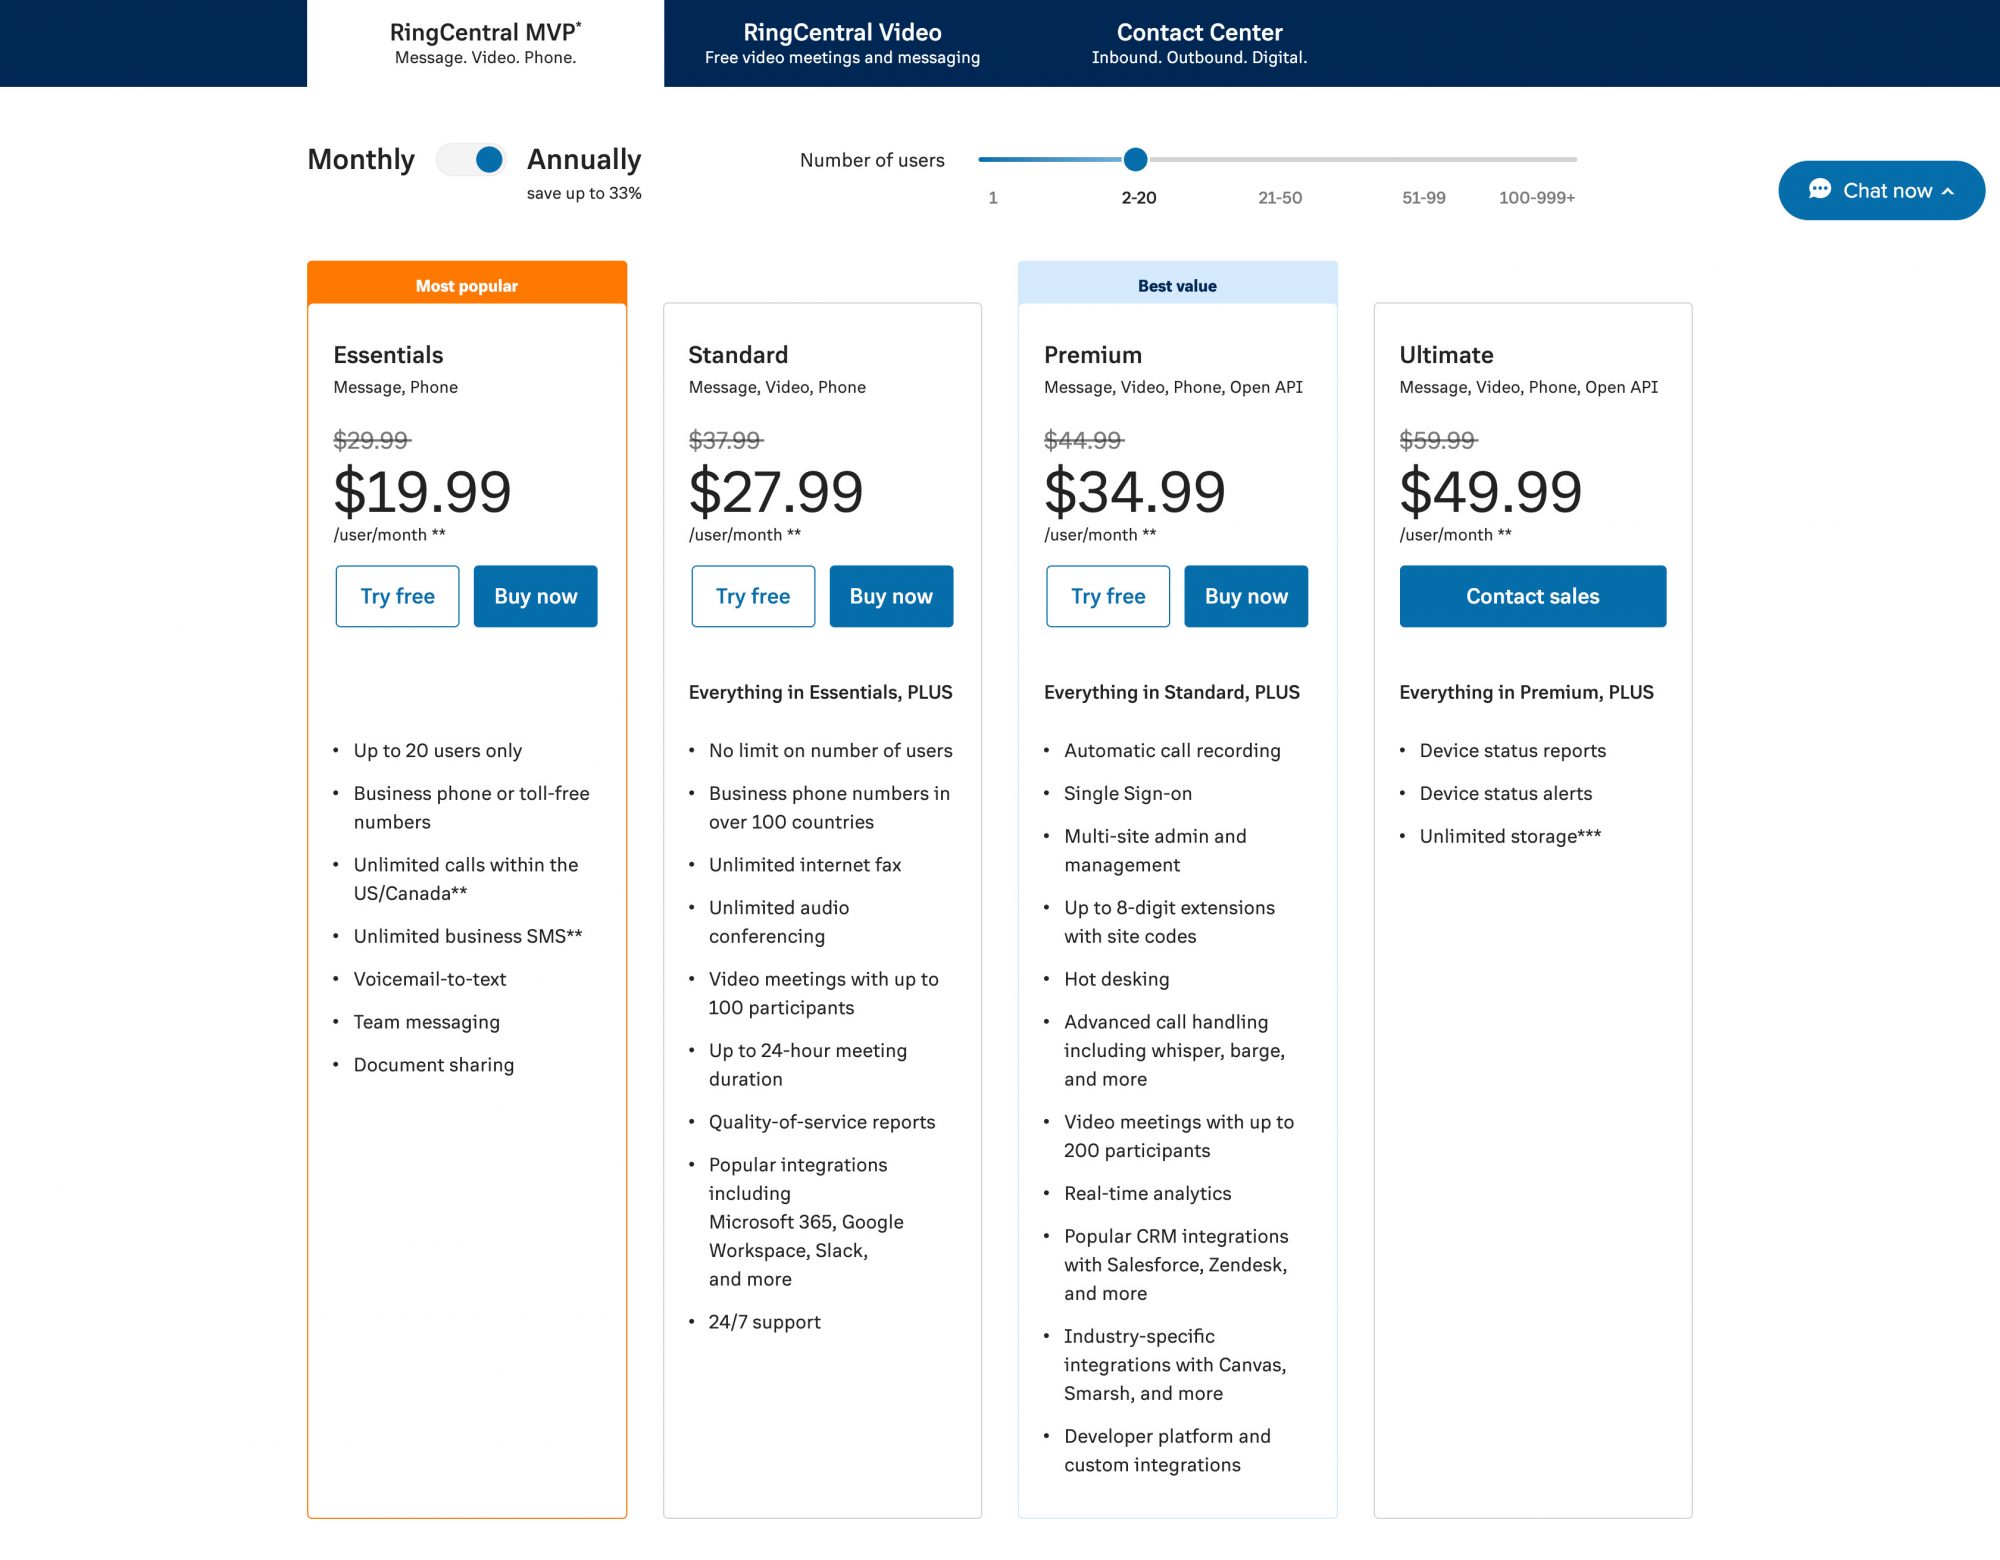 RingCentral Plans and Pricing